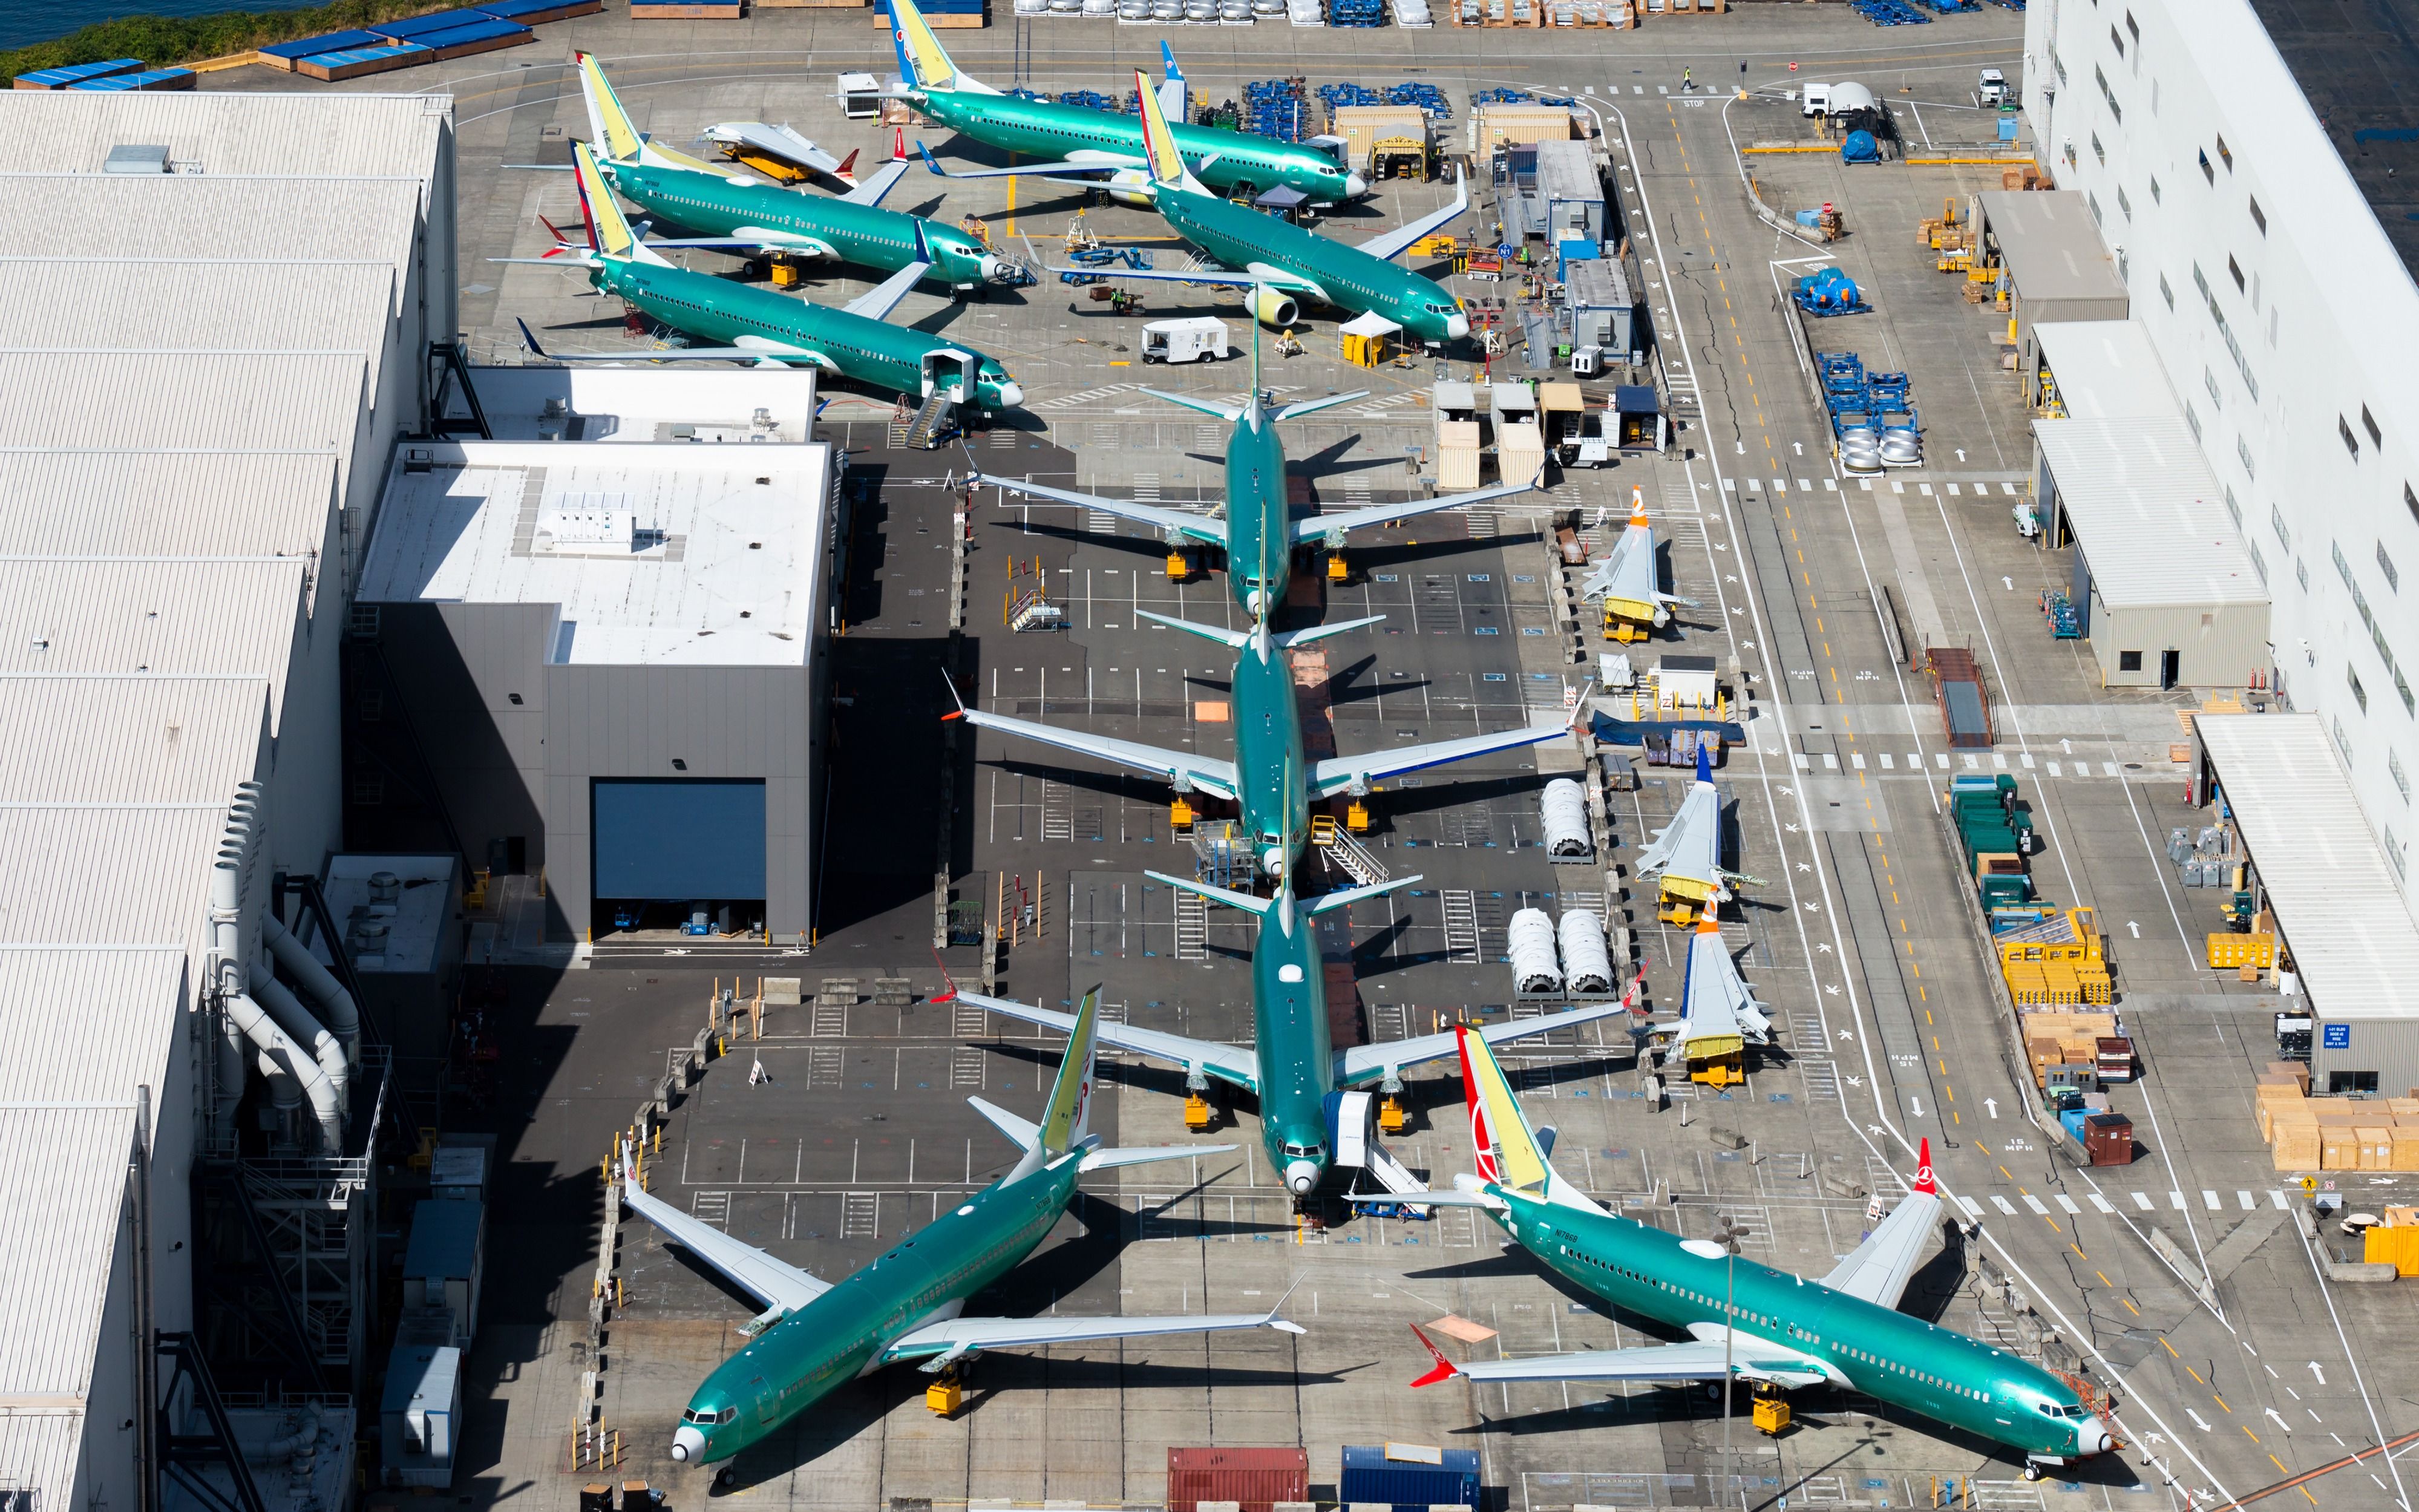 Many Boeing 737s parked outside the Renton Factory.